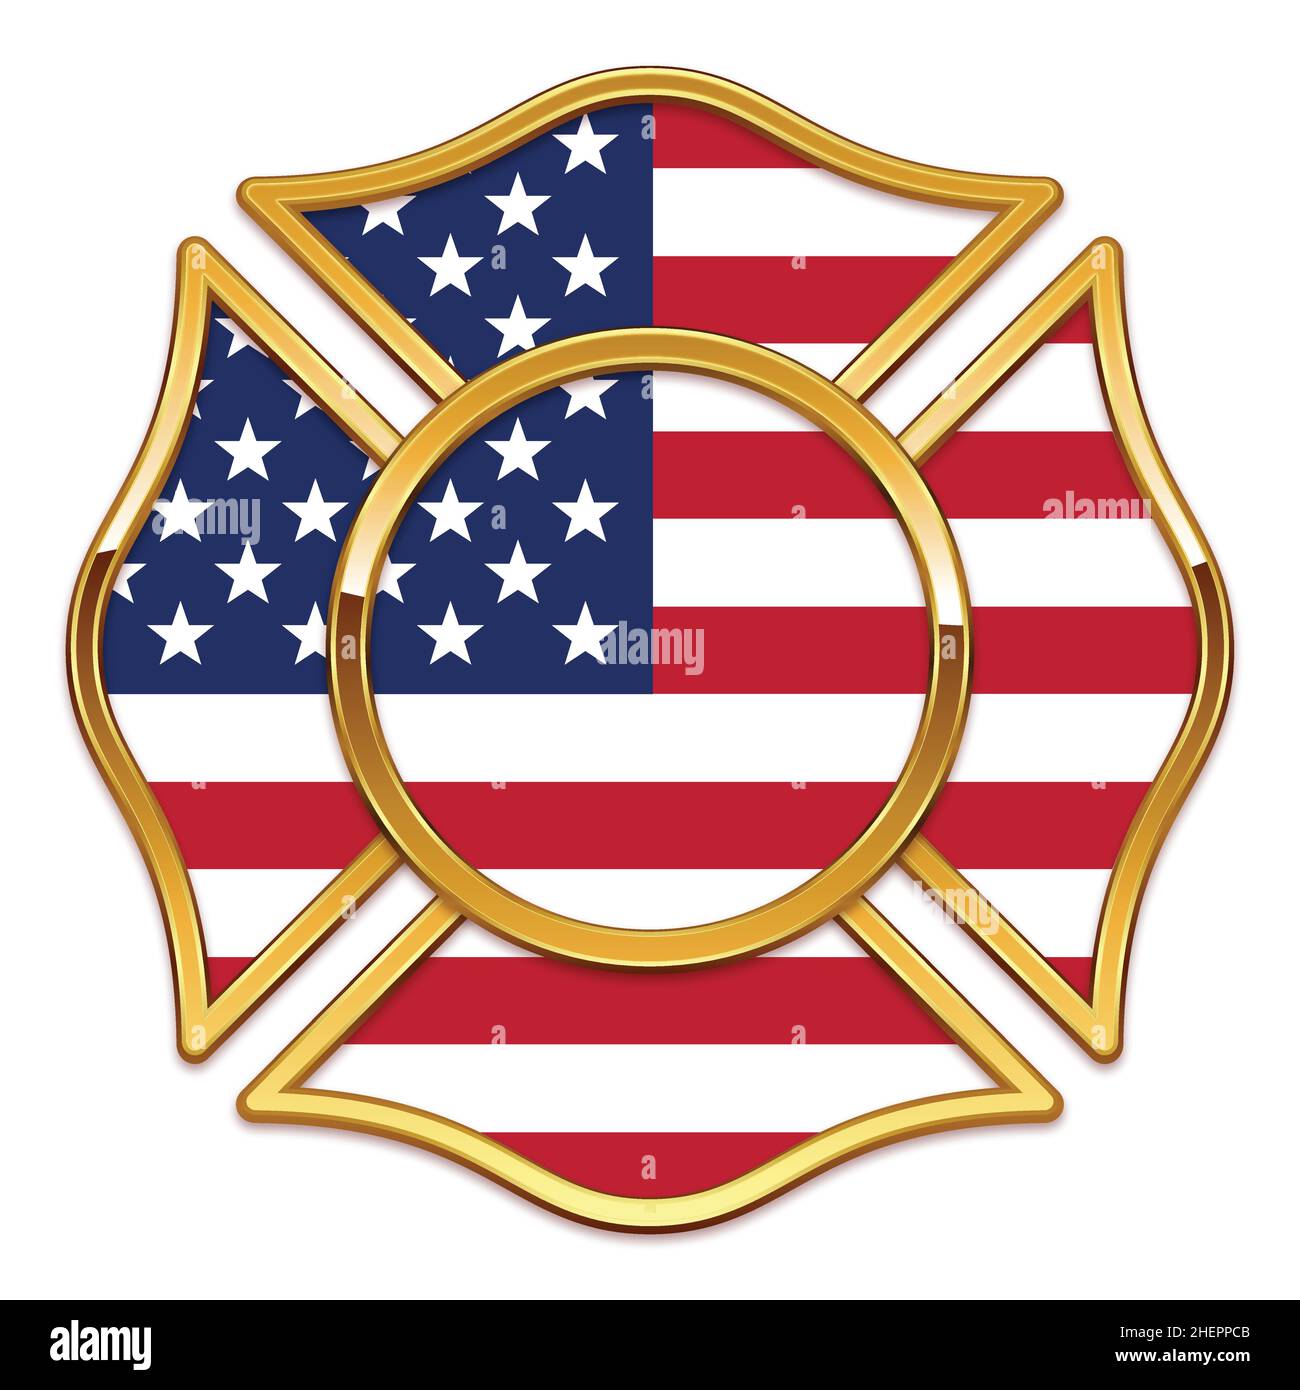 Fire Department Cross with EMT Symbol Patch Isolated on White